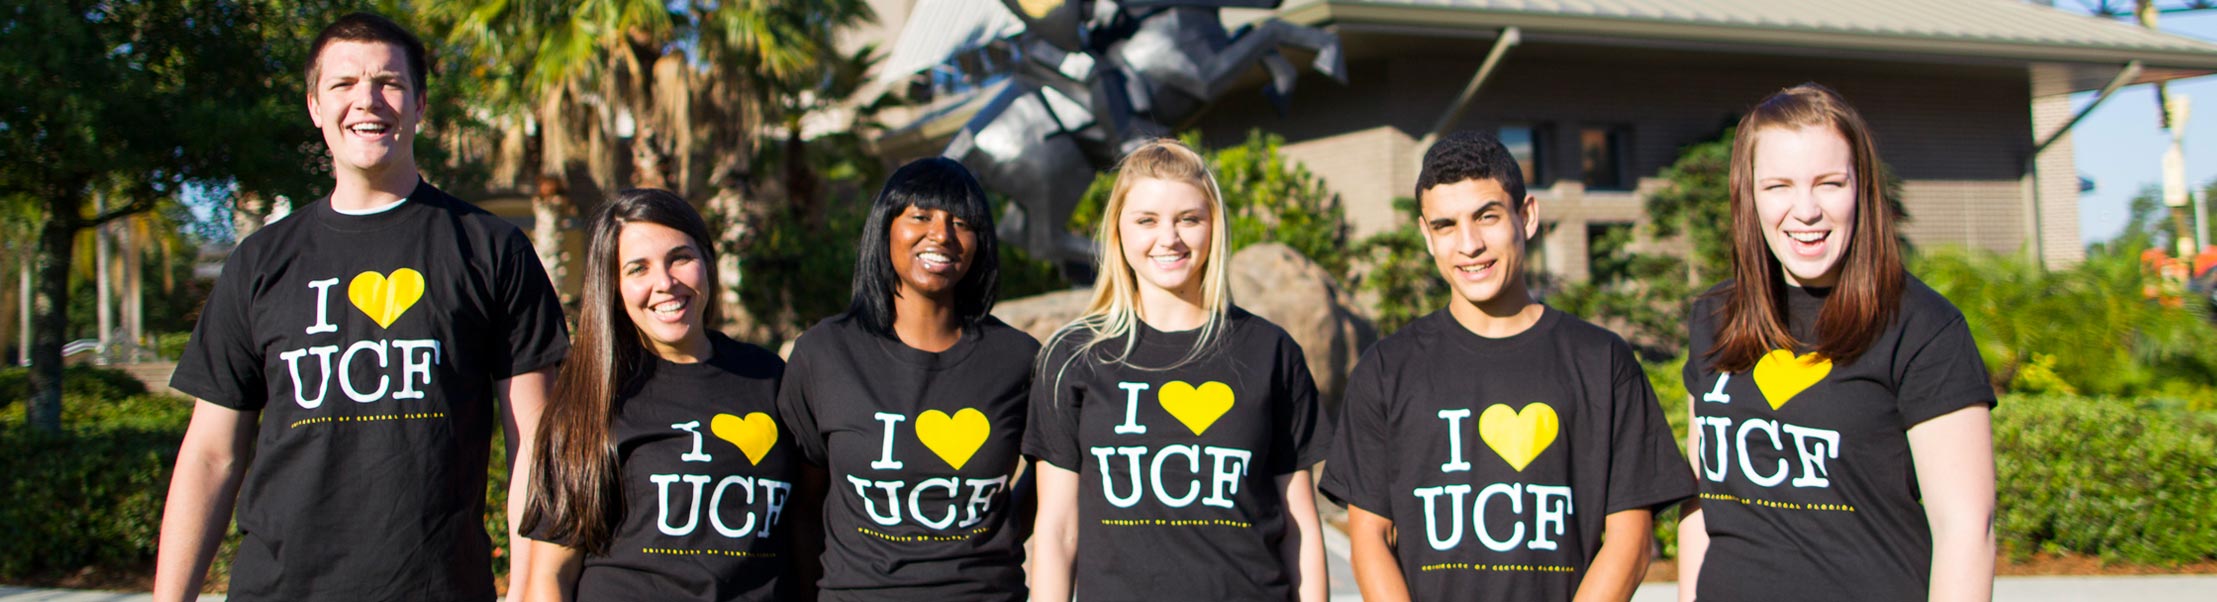 a group shot of UCF students standing a row smiling at the camera wearing I (heart) UCF tshirts